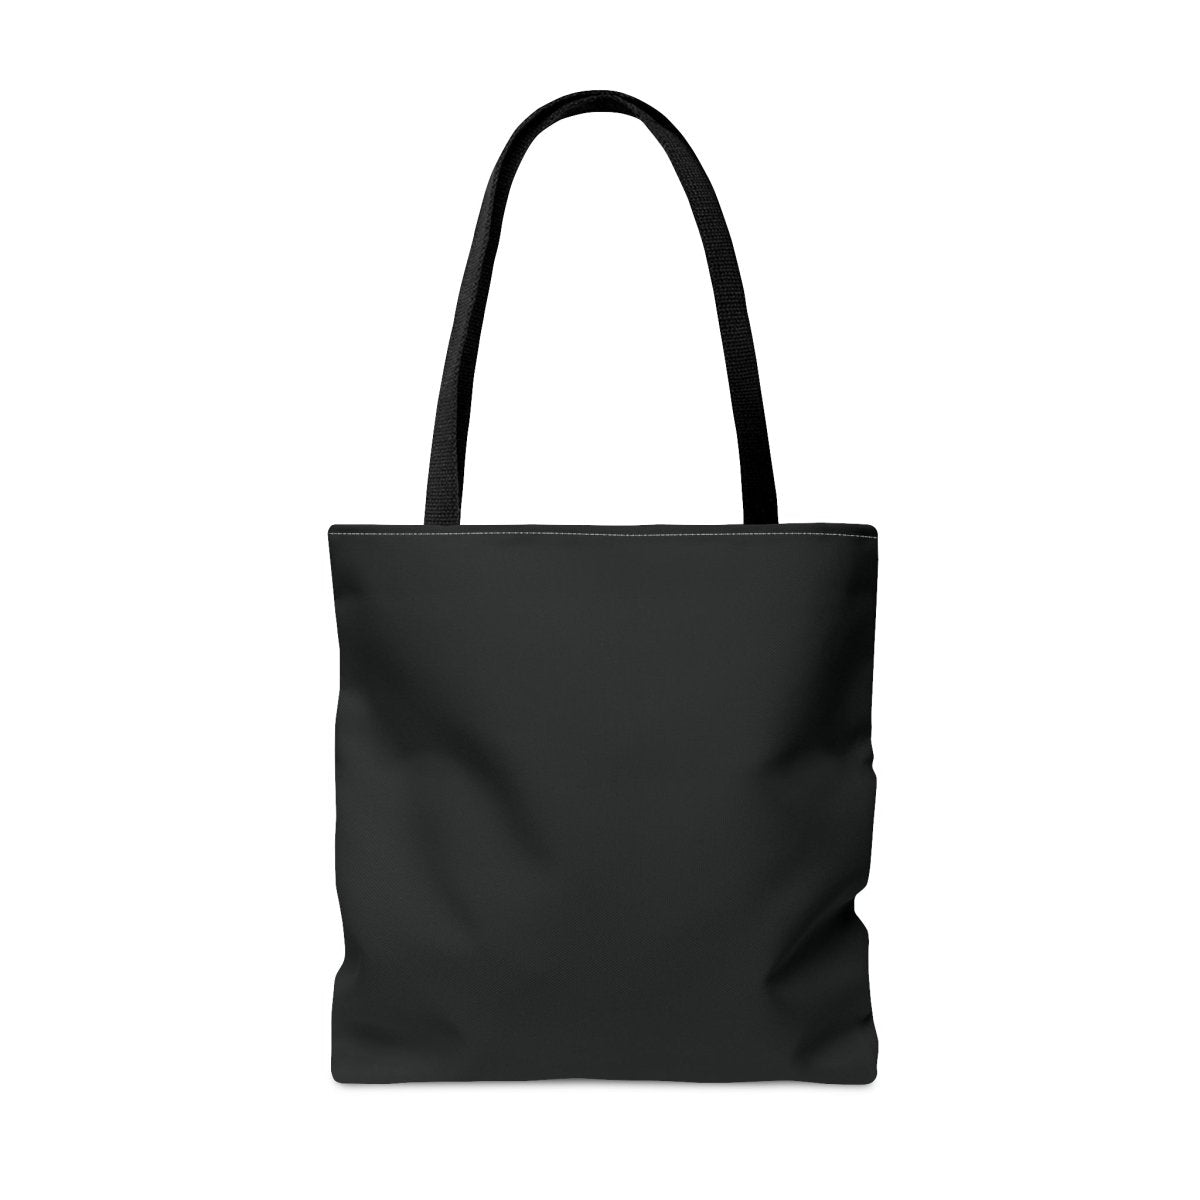 Royal Cat Tote Bag - Style A - DarzyStore